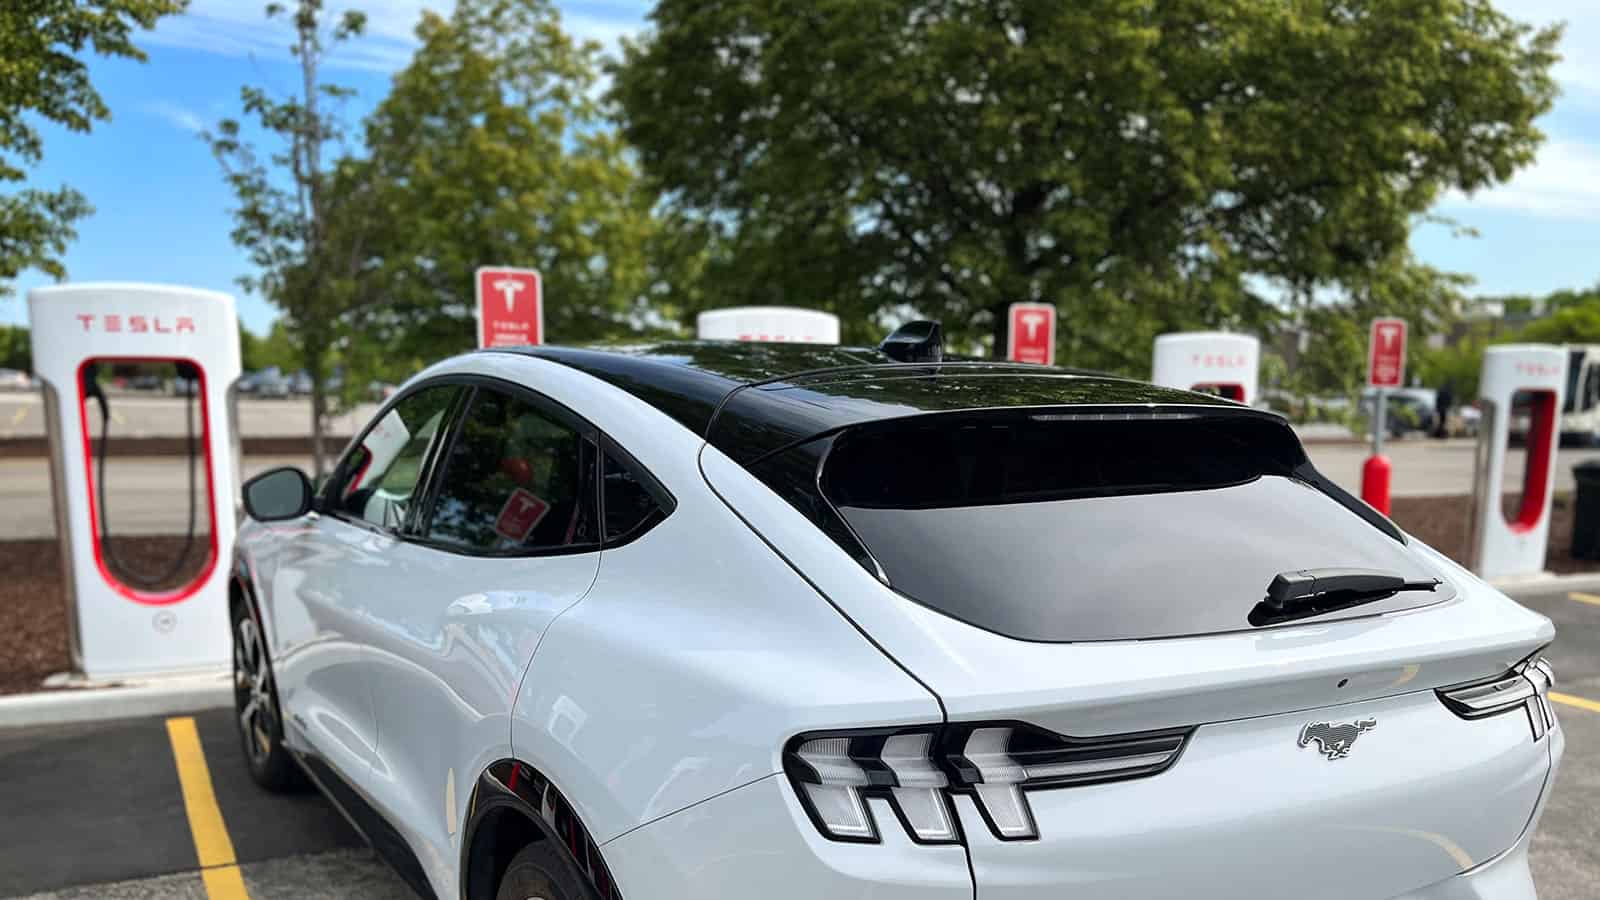 Ford Mustang Mach-E parked at Tesla Supercharger locations